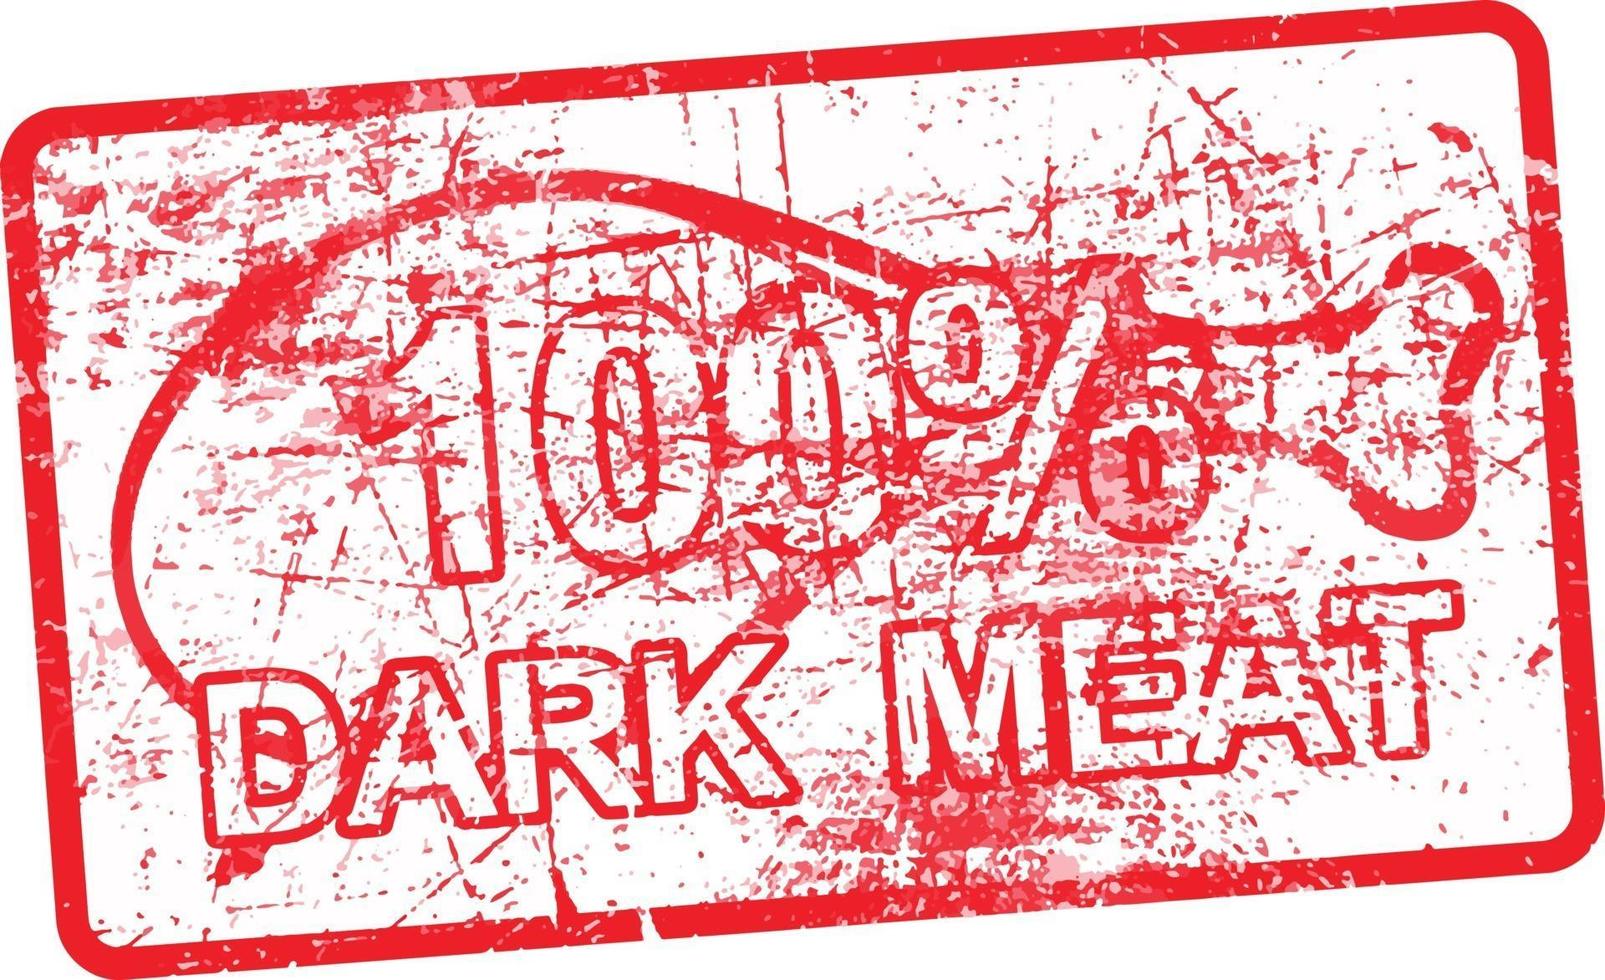 100 per cent dark meat -  red rubber dirty grungy stamp vector